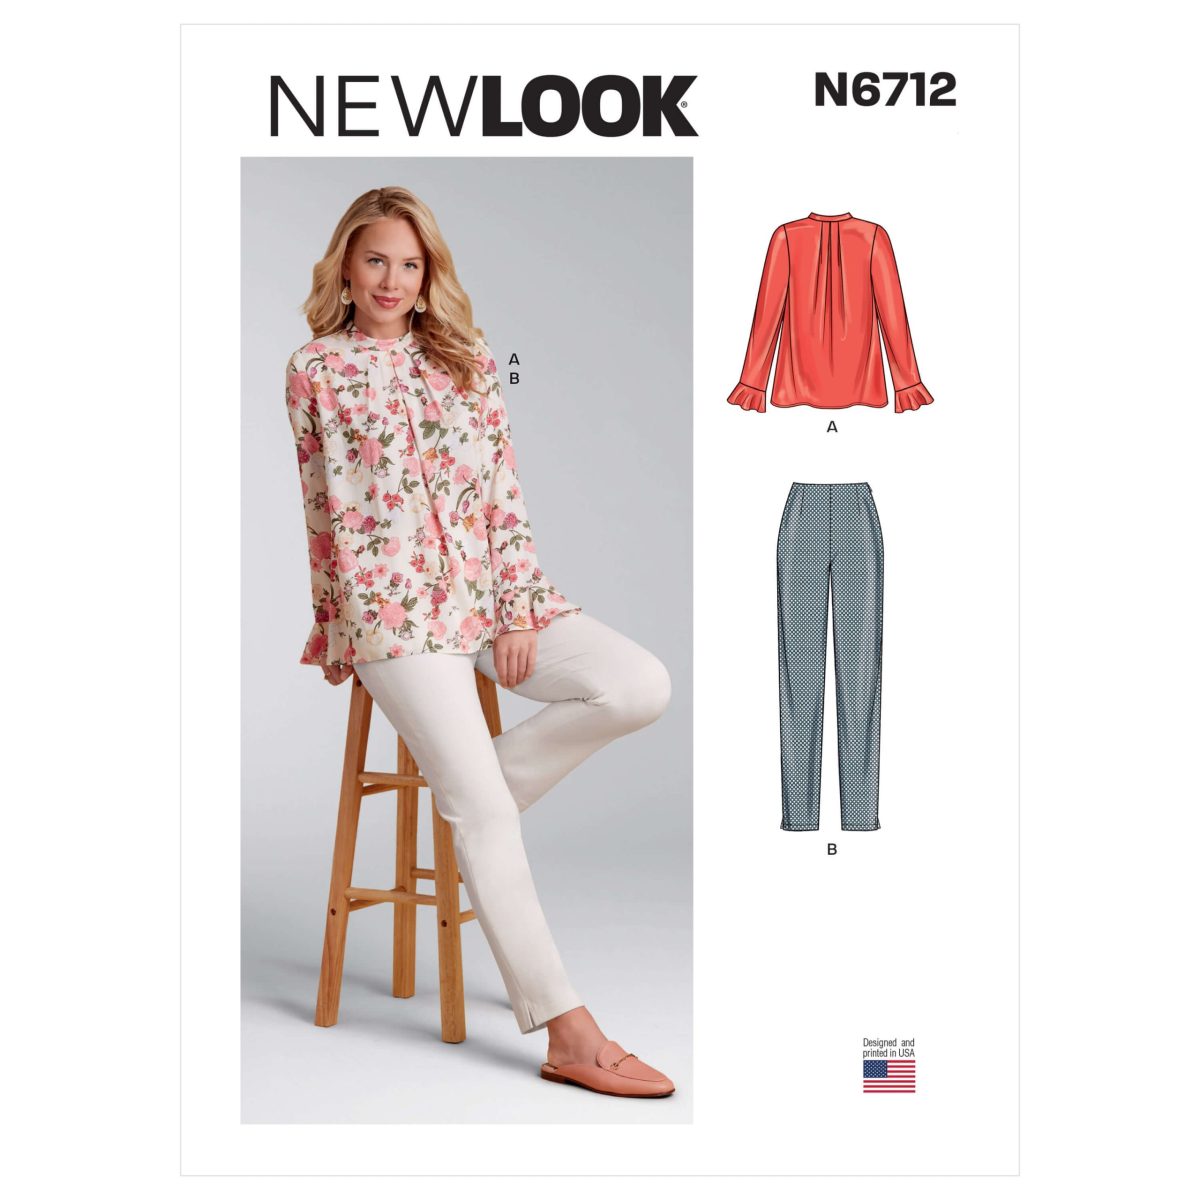 New Look Sewing Pattern N6712 Misses' Top and Trousers